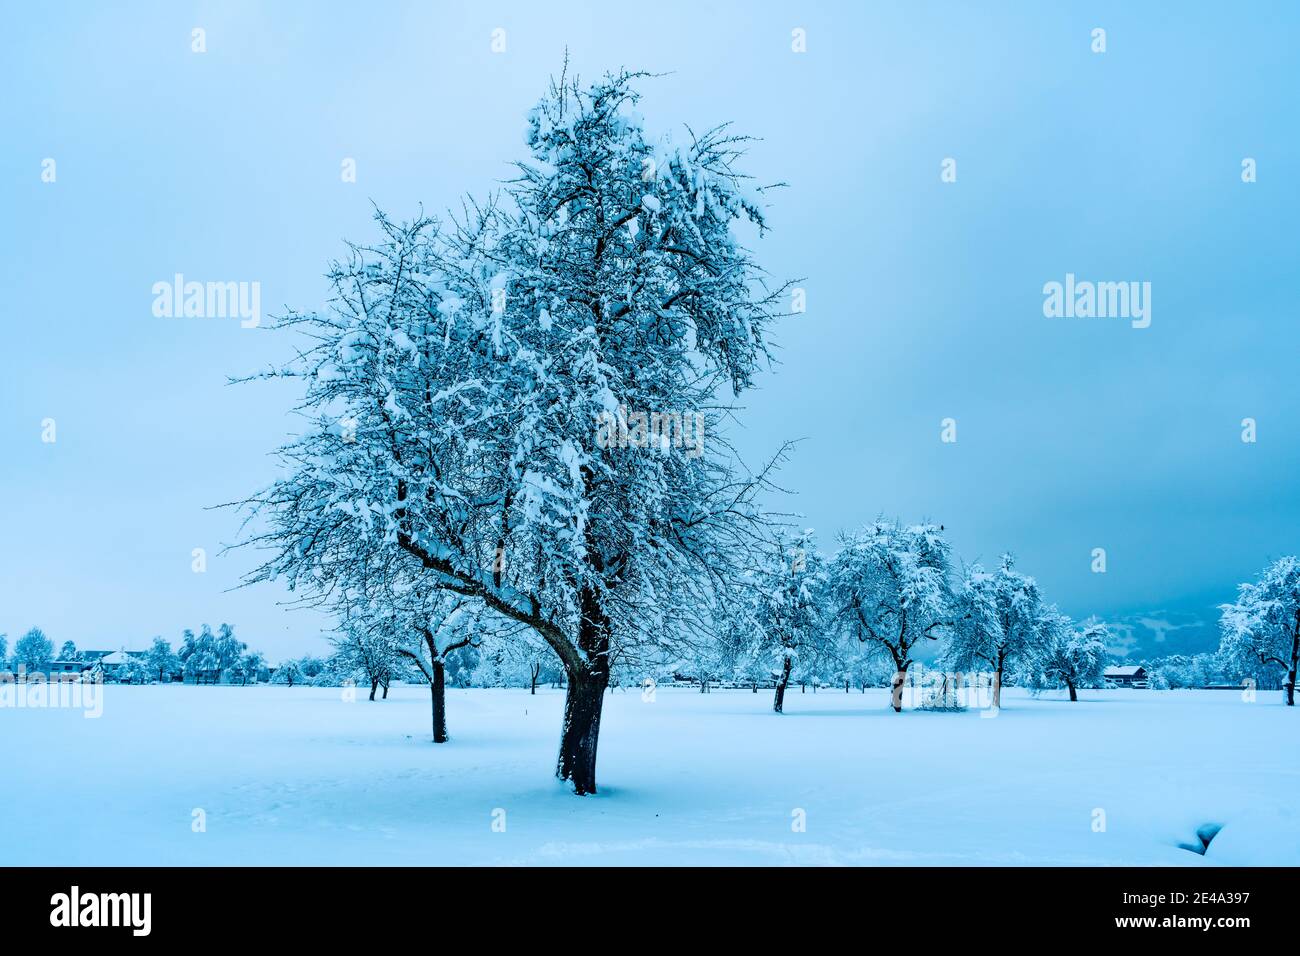 Winter morning landscape with snowy field and single tree, foggy view with trees and houses in the background. interessante Winterlandschaft im Nebel Stock Photo